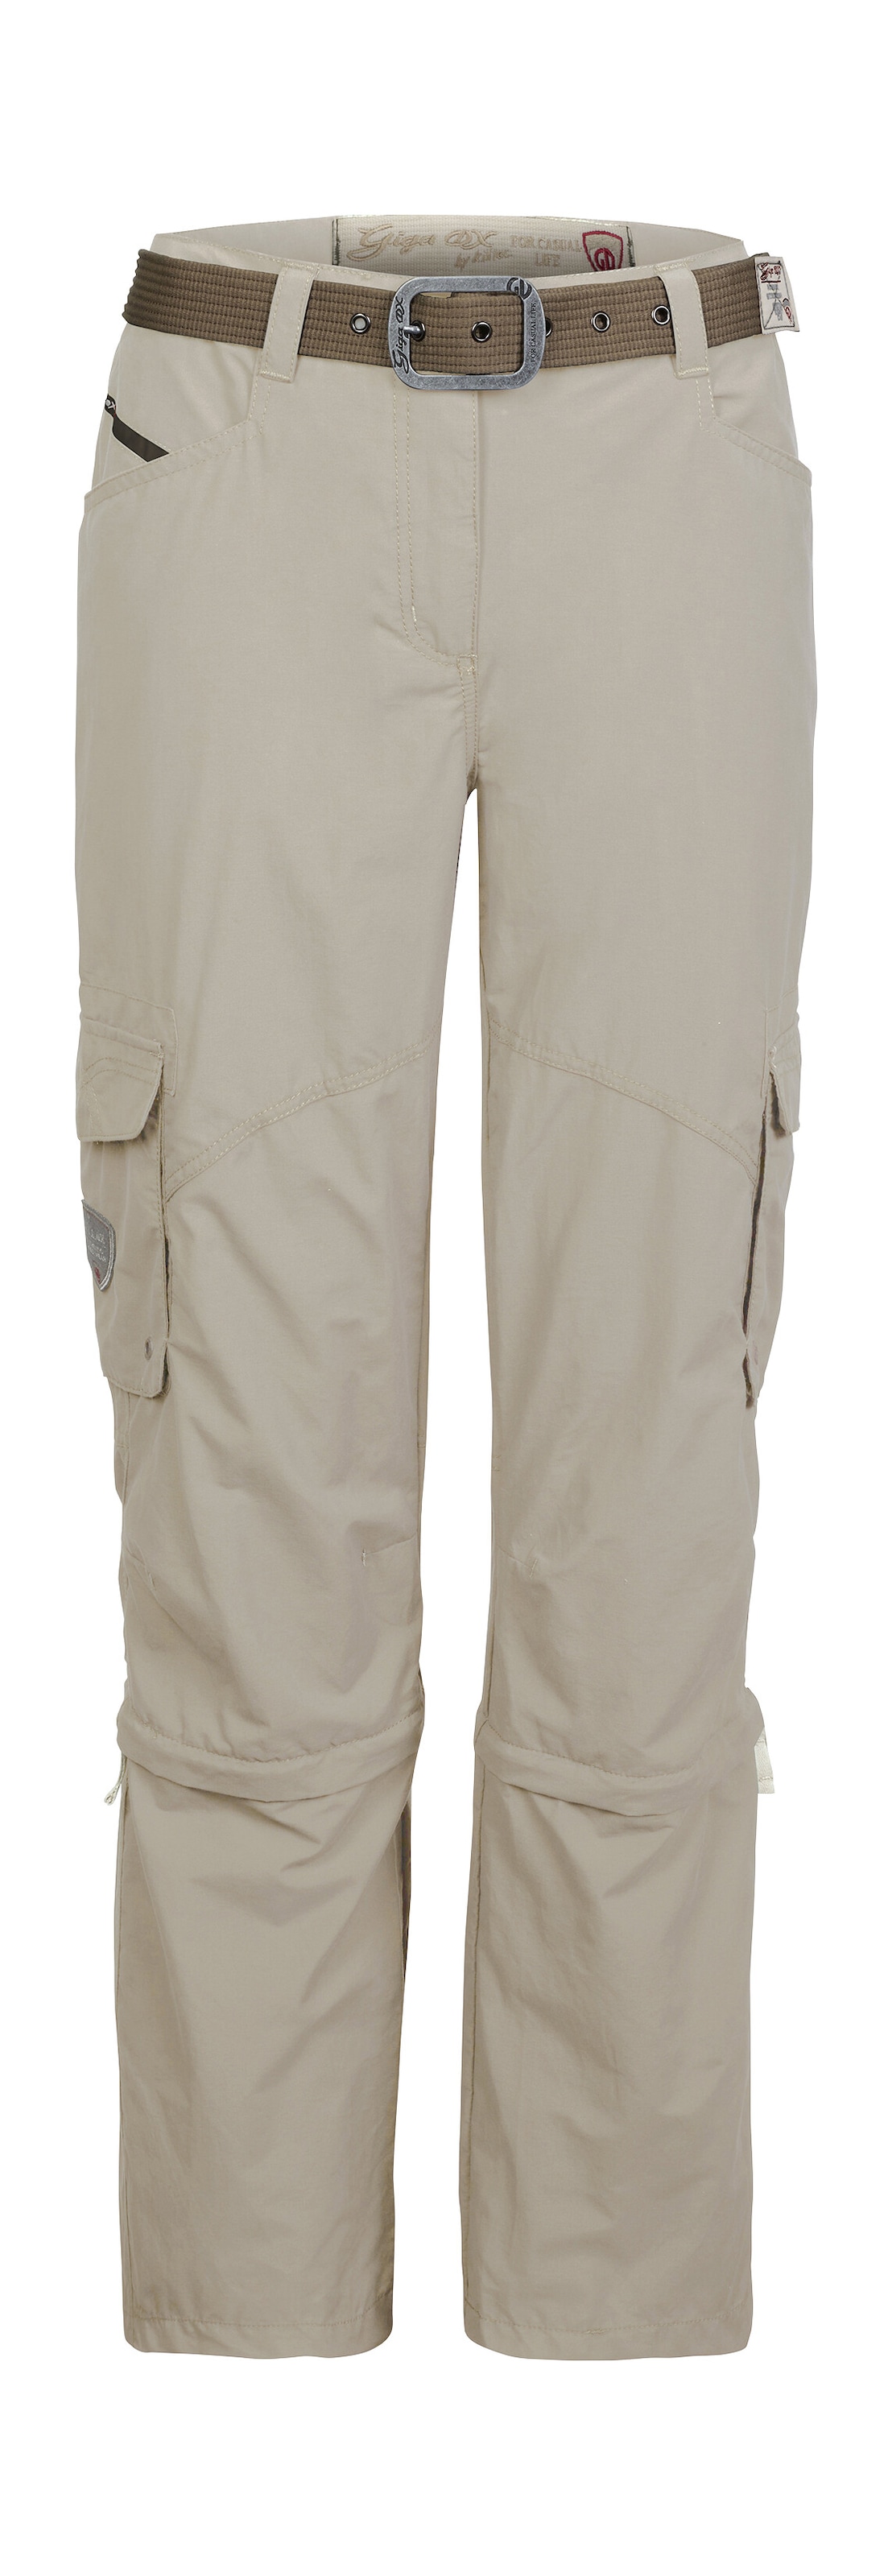 Shop 37 DX PNTS« Zip-off-Hose G.I.G.A. OTTO im WMN killtec Online »GS by